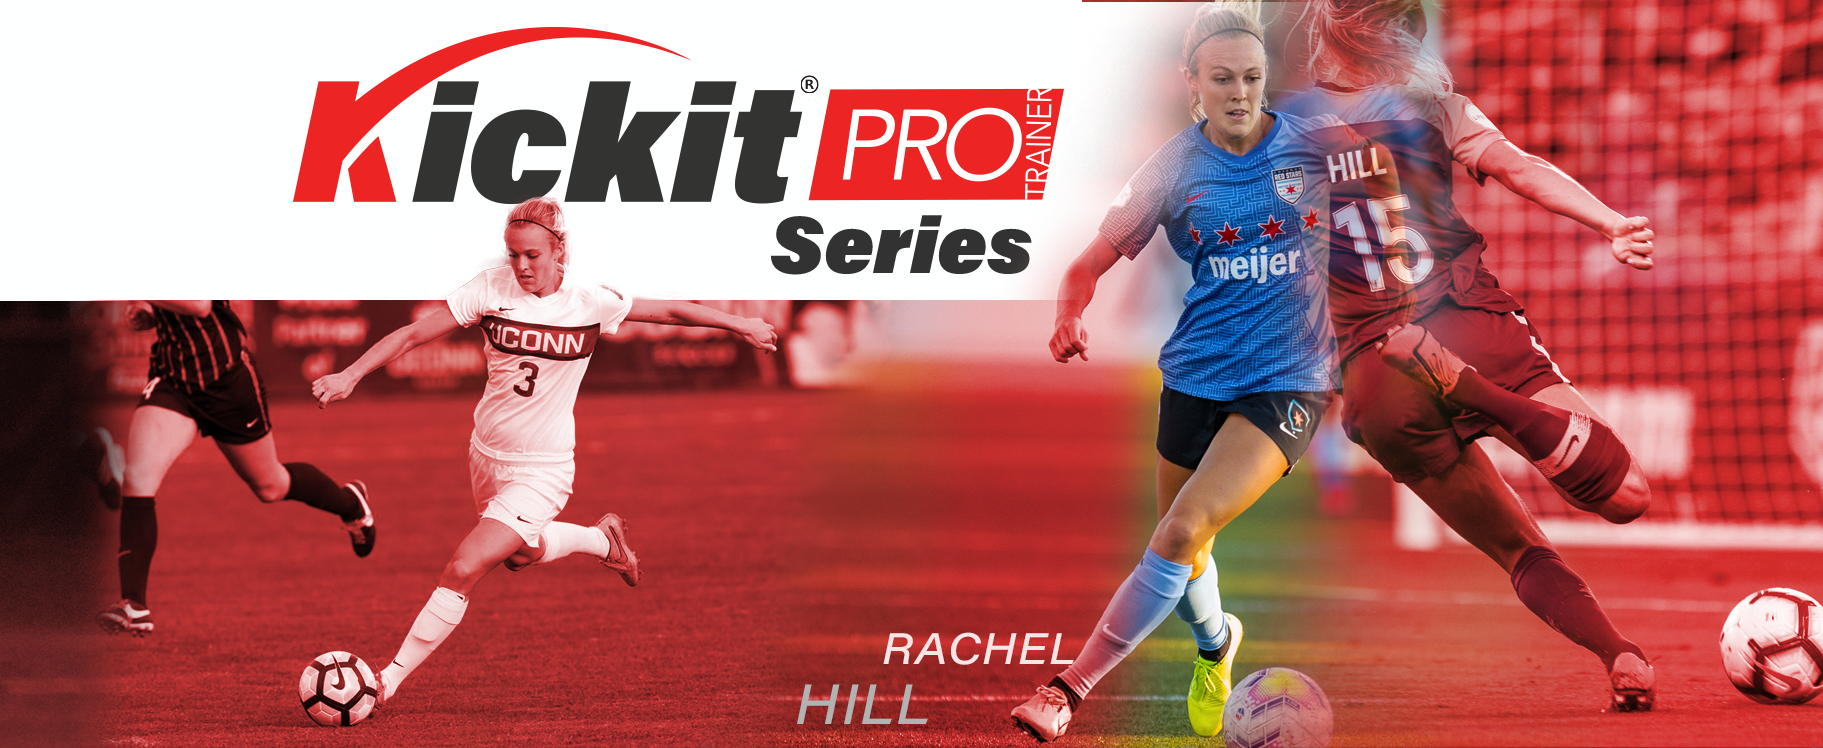 Rachel Hill "All Around the World in 3 Years": Kickit Pro-Trainer Series